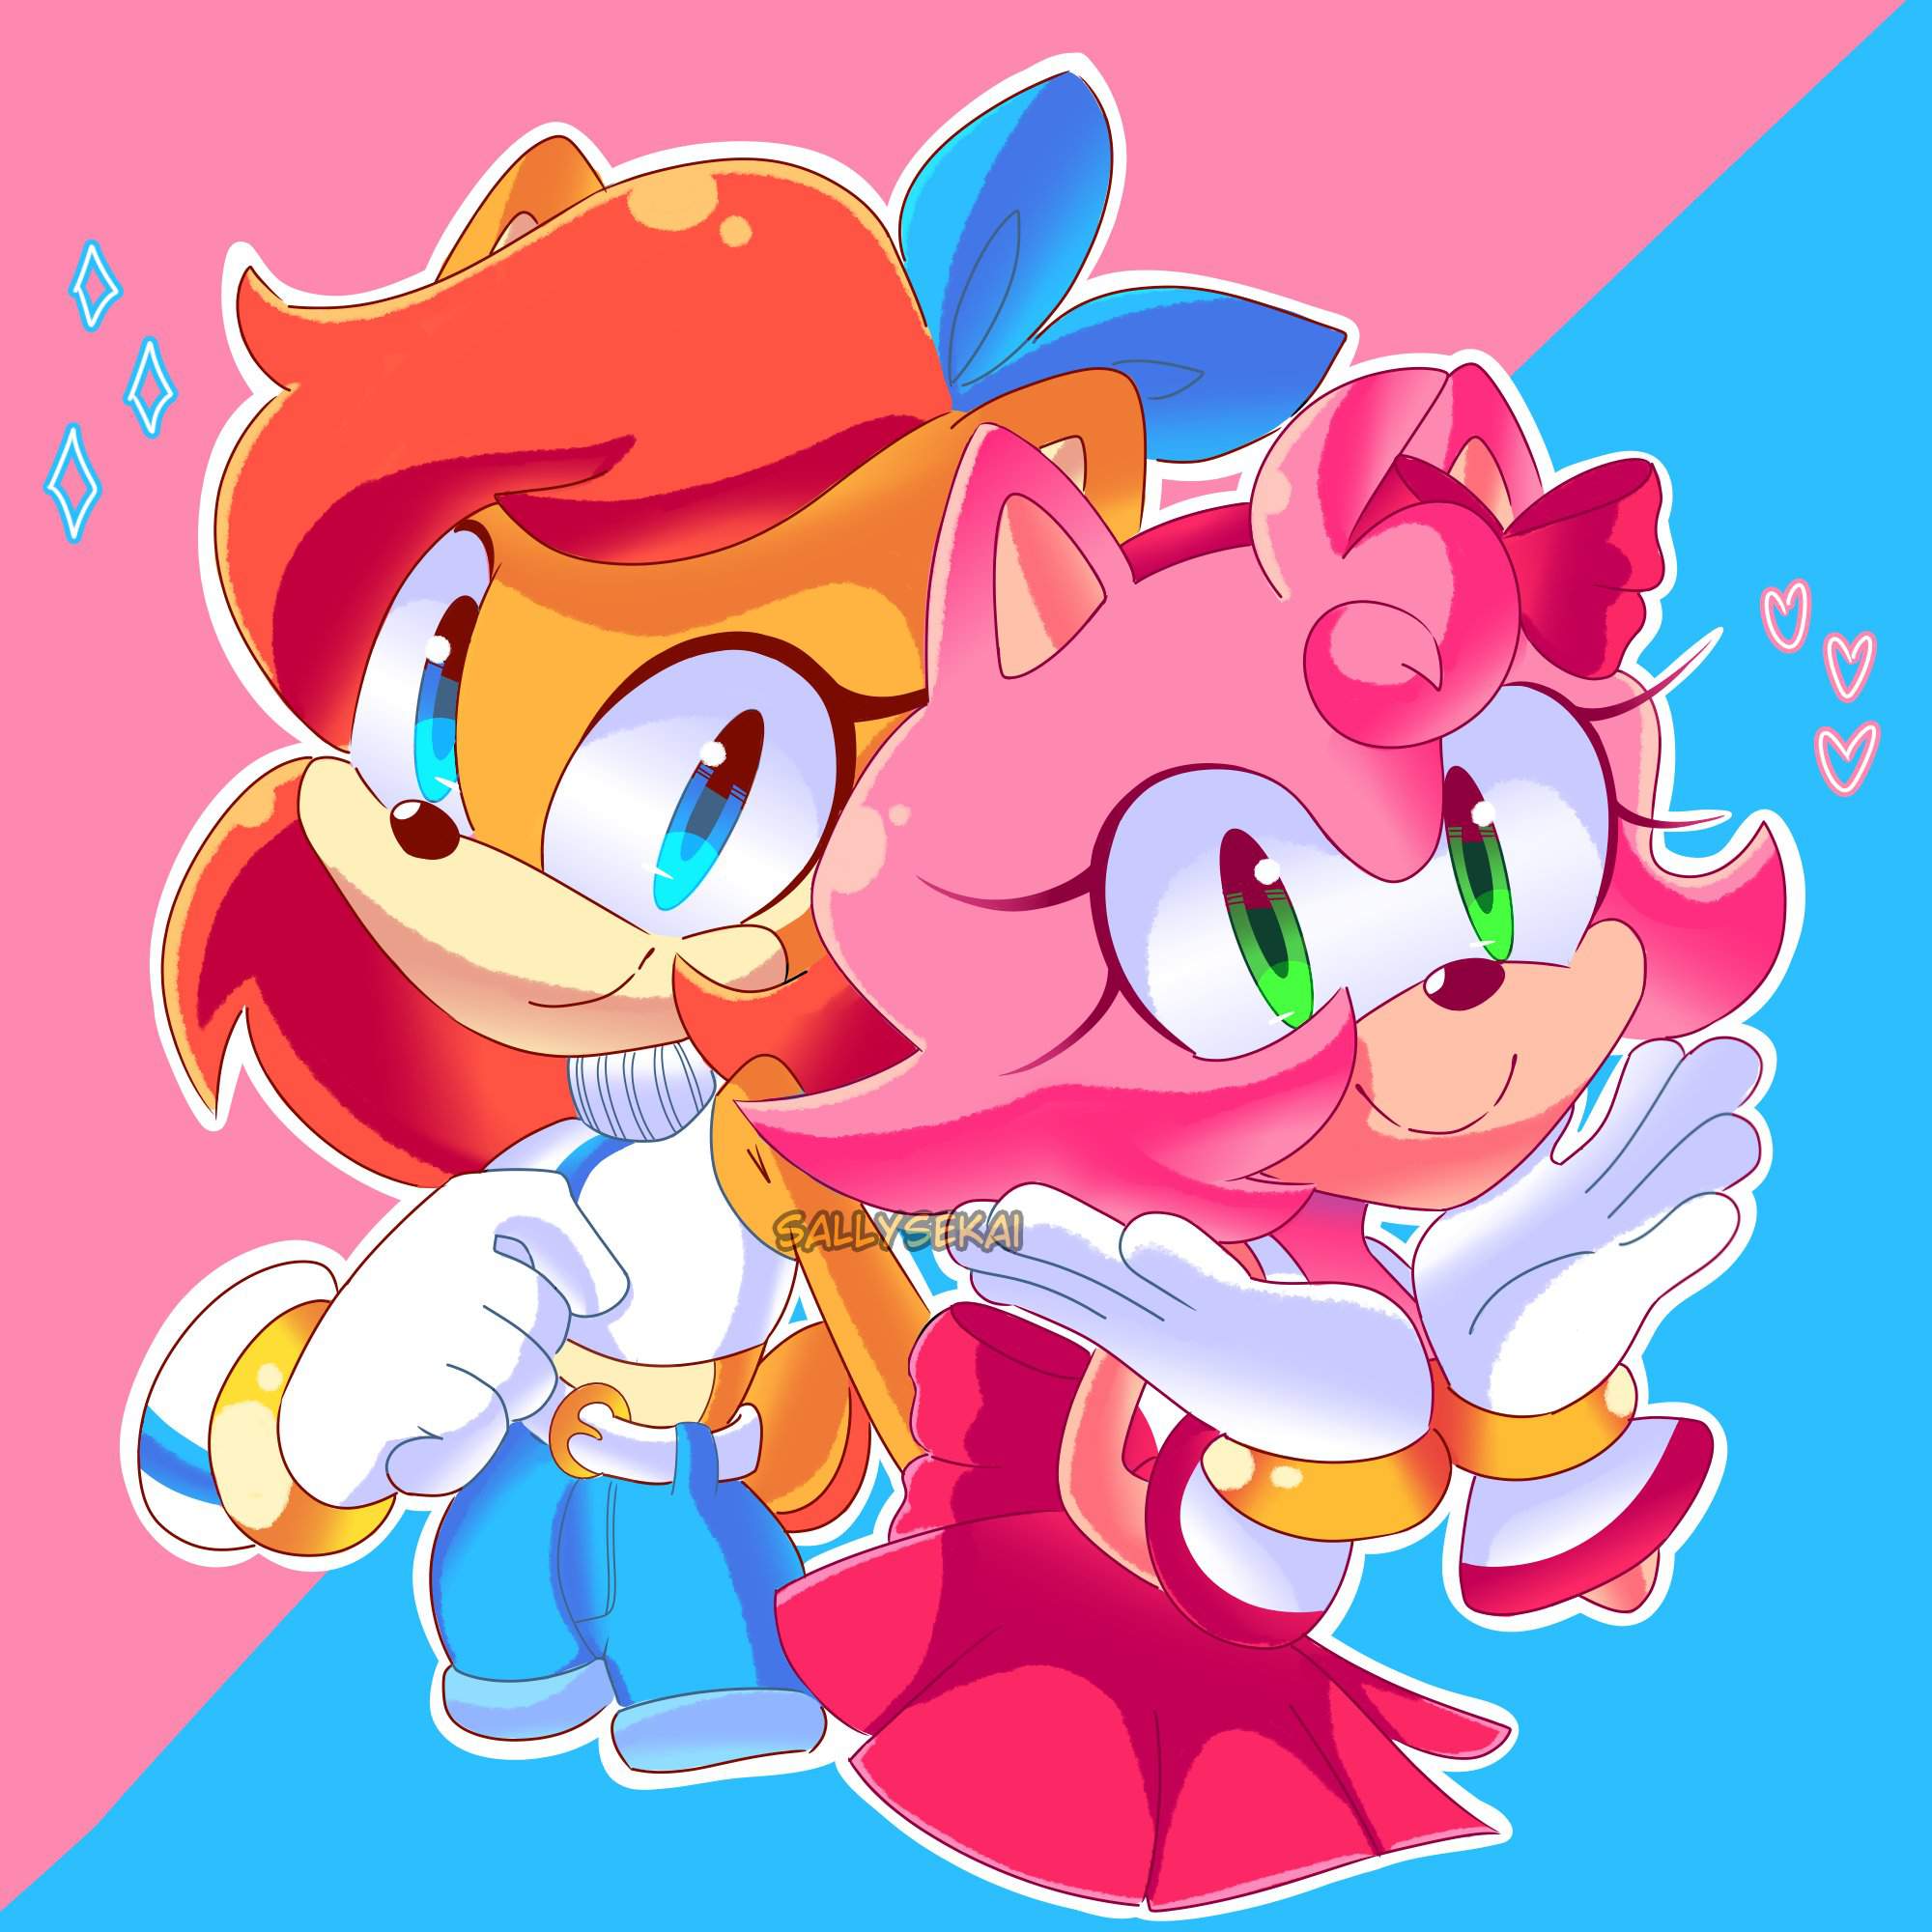 Amy Rose And Sally Acorn ️💙 ️ Sonic The Hedgehog Amino 